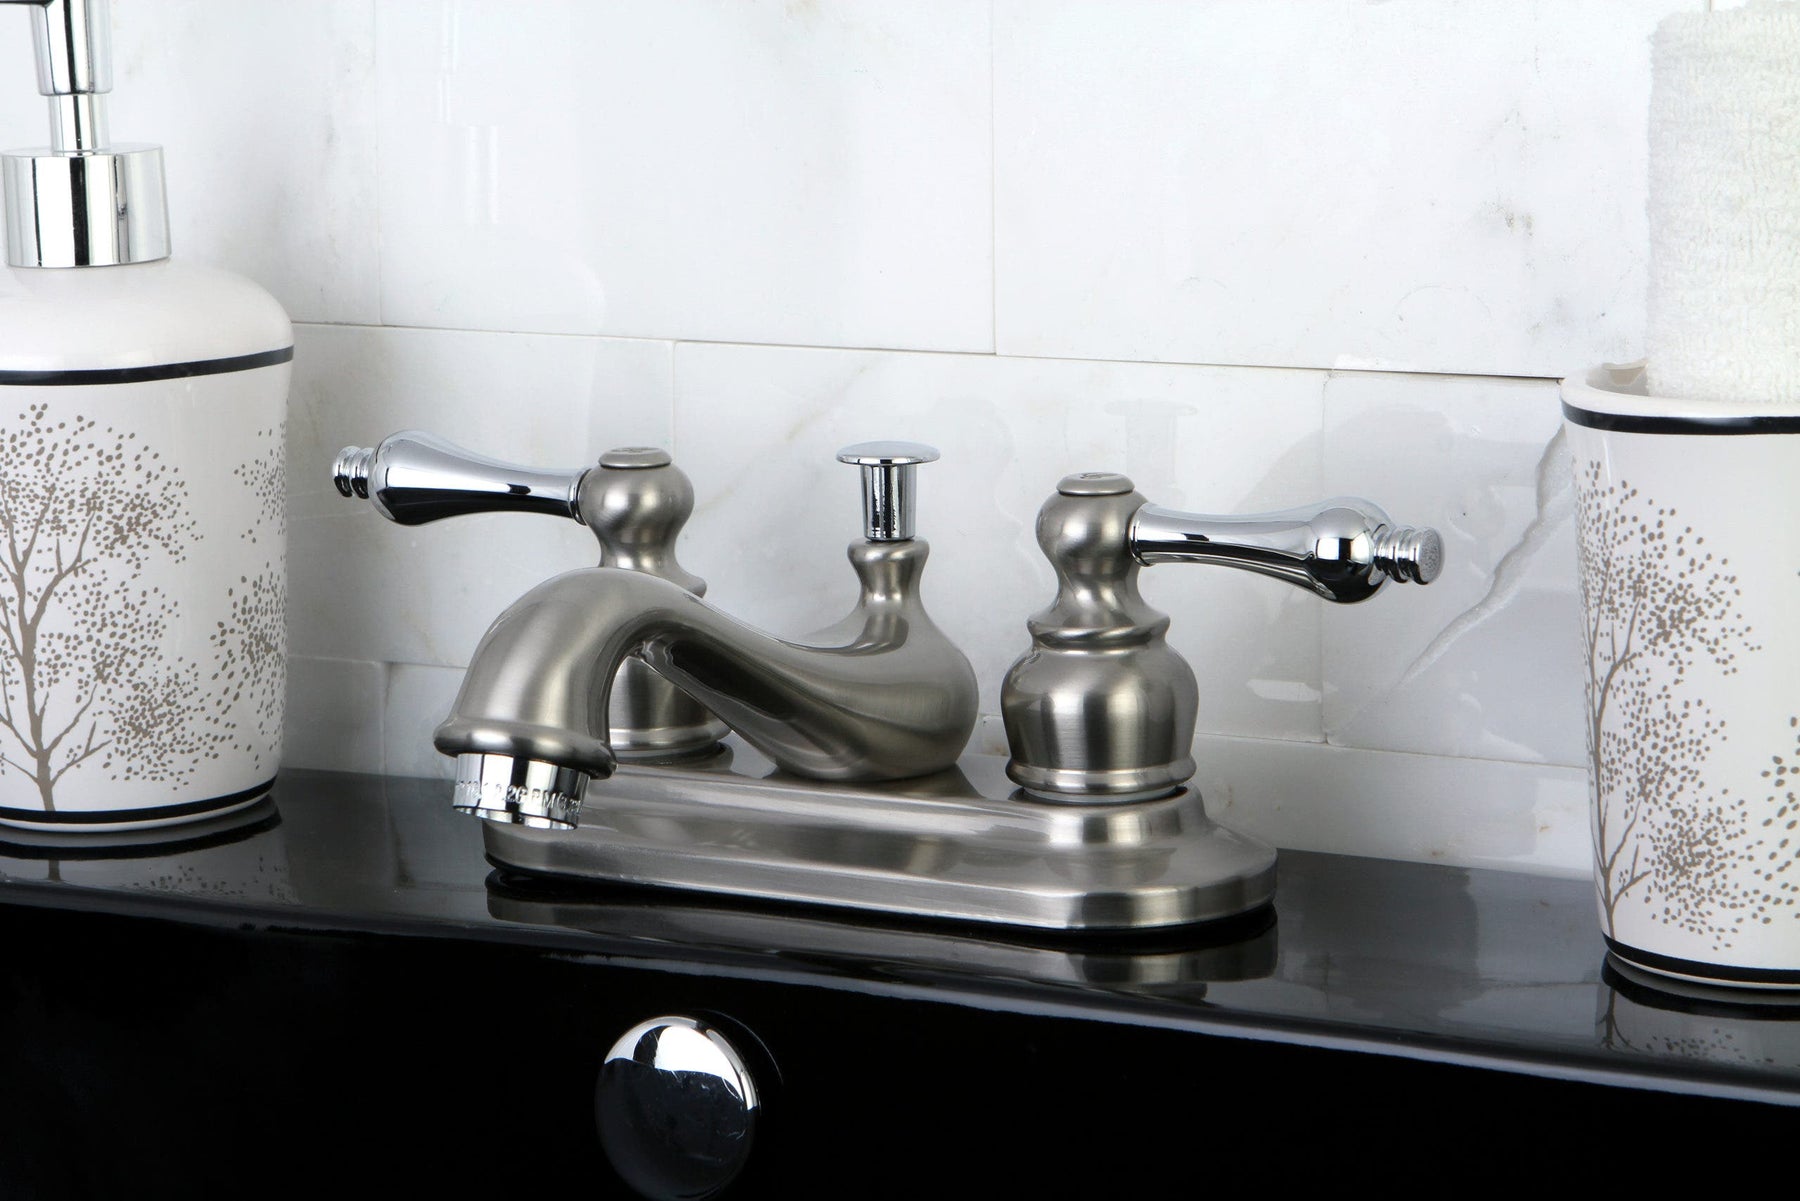 Faucet Feature 7: Profile of the KB607ALB brushed nickel bathroom faucet